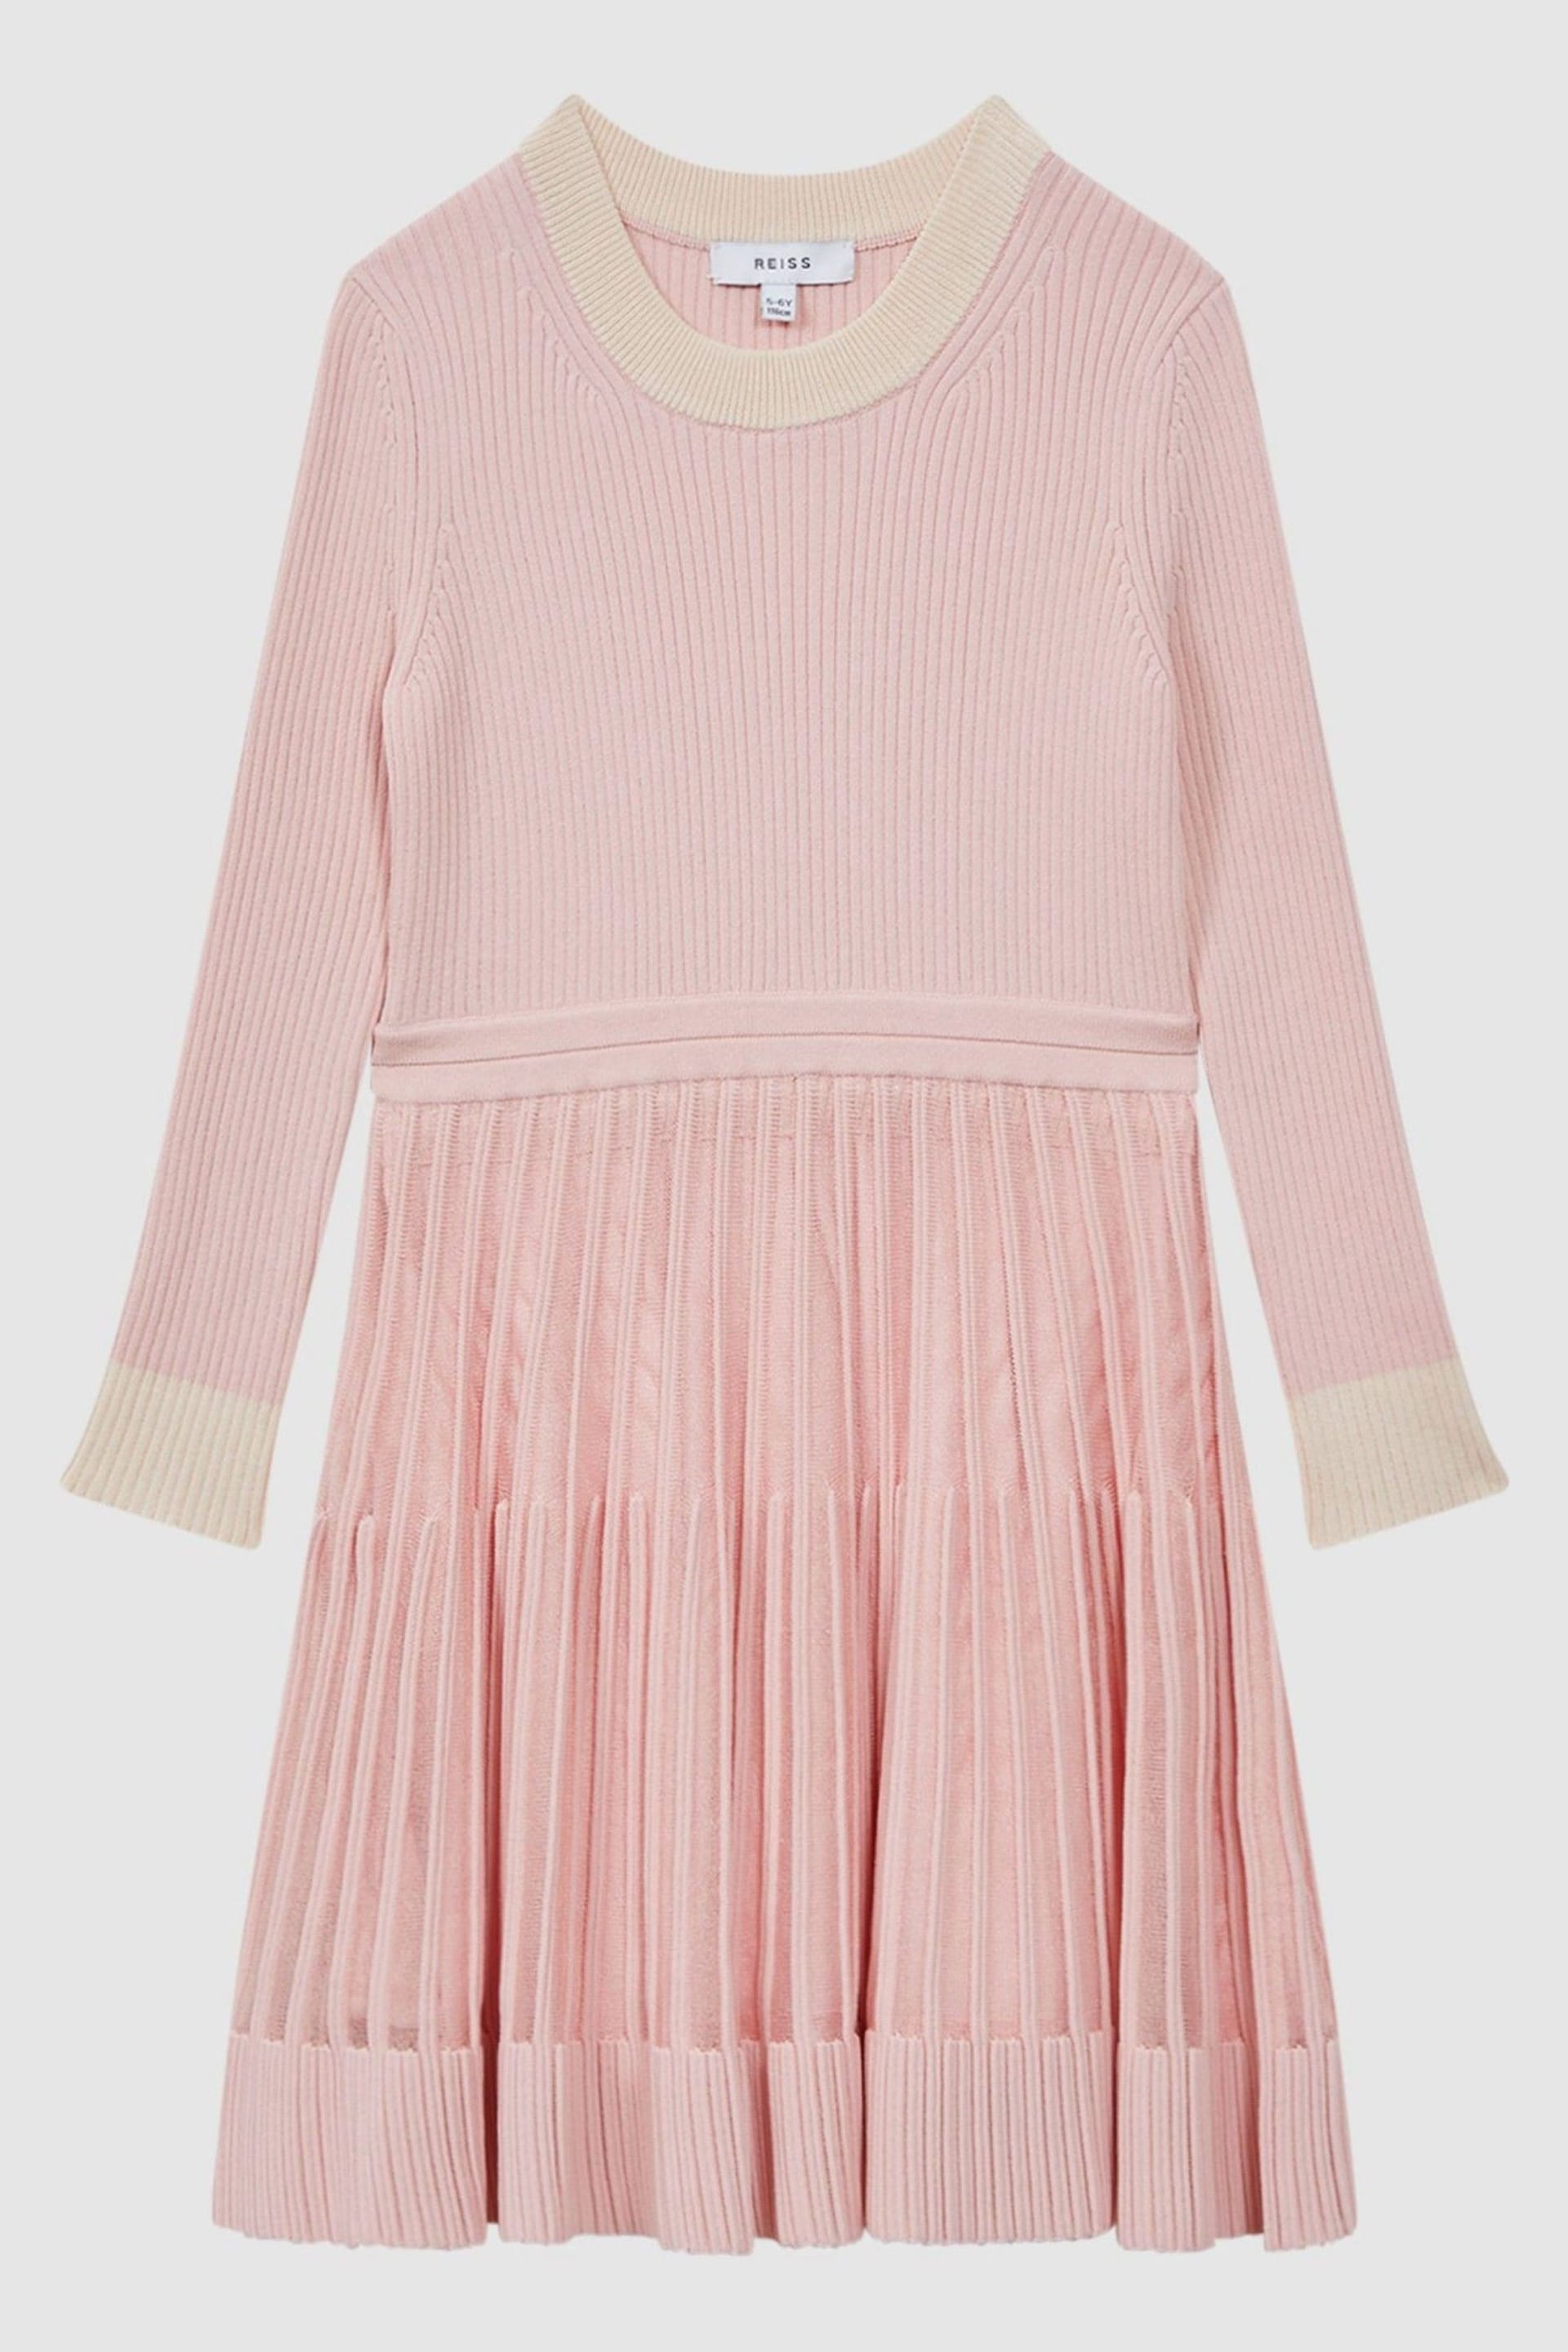 Reiss Pink Teagan Teen Ribbed Fit-and-Flare Dress - Image 2 of 6